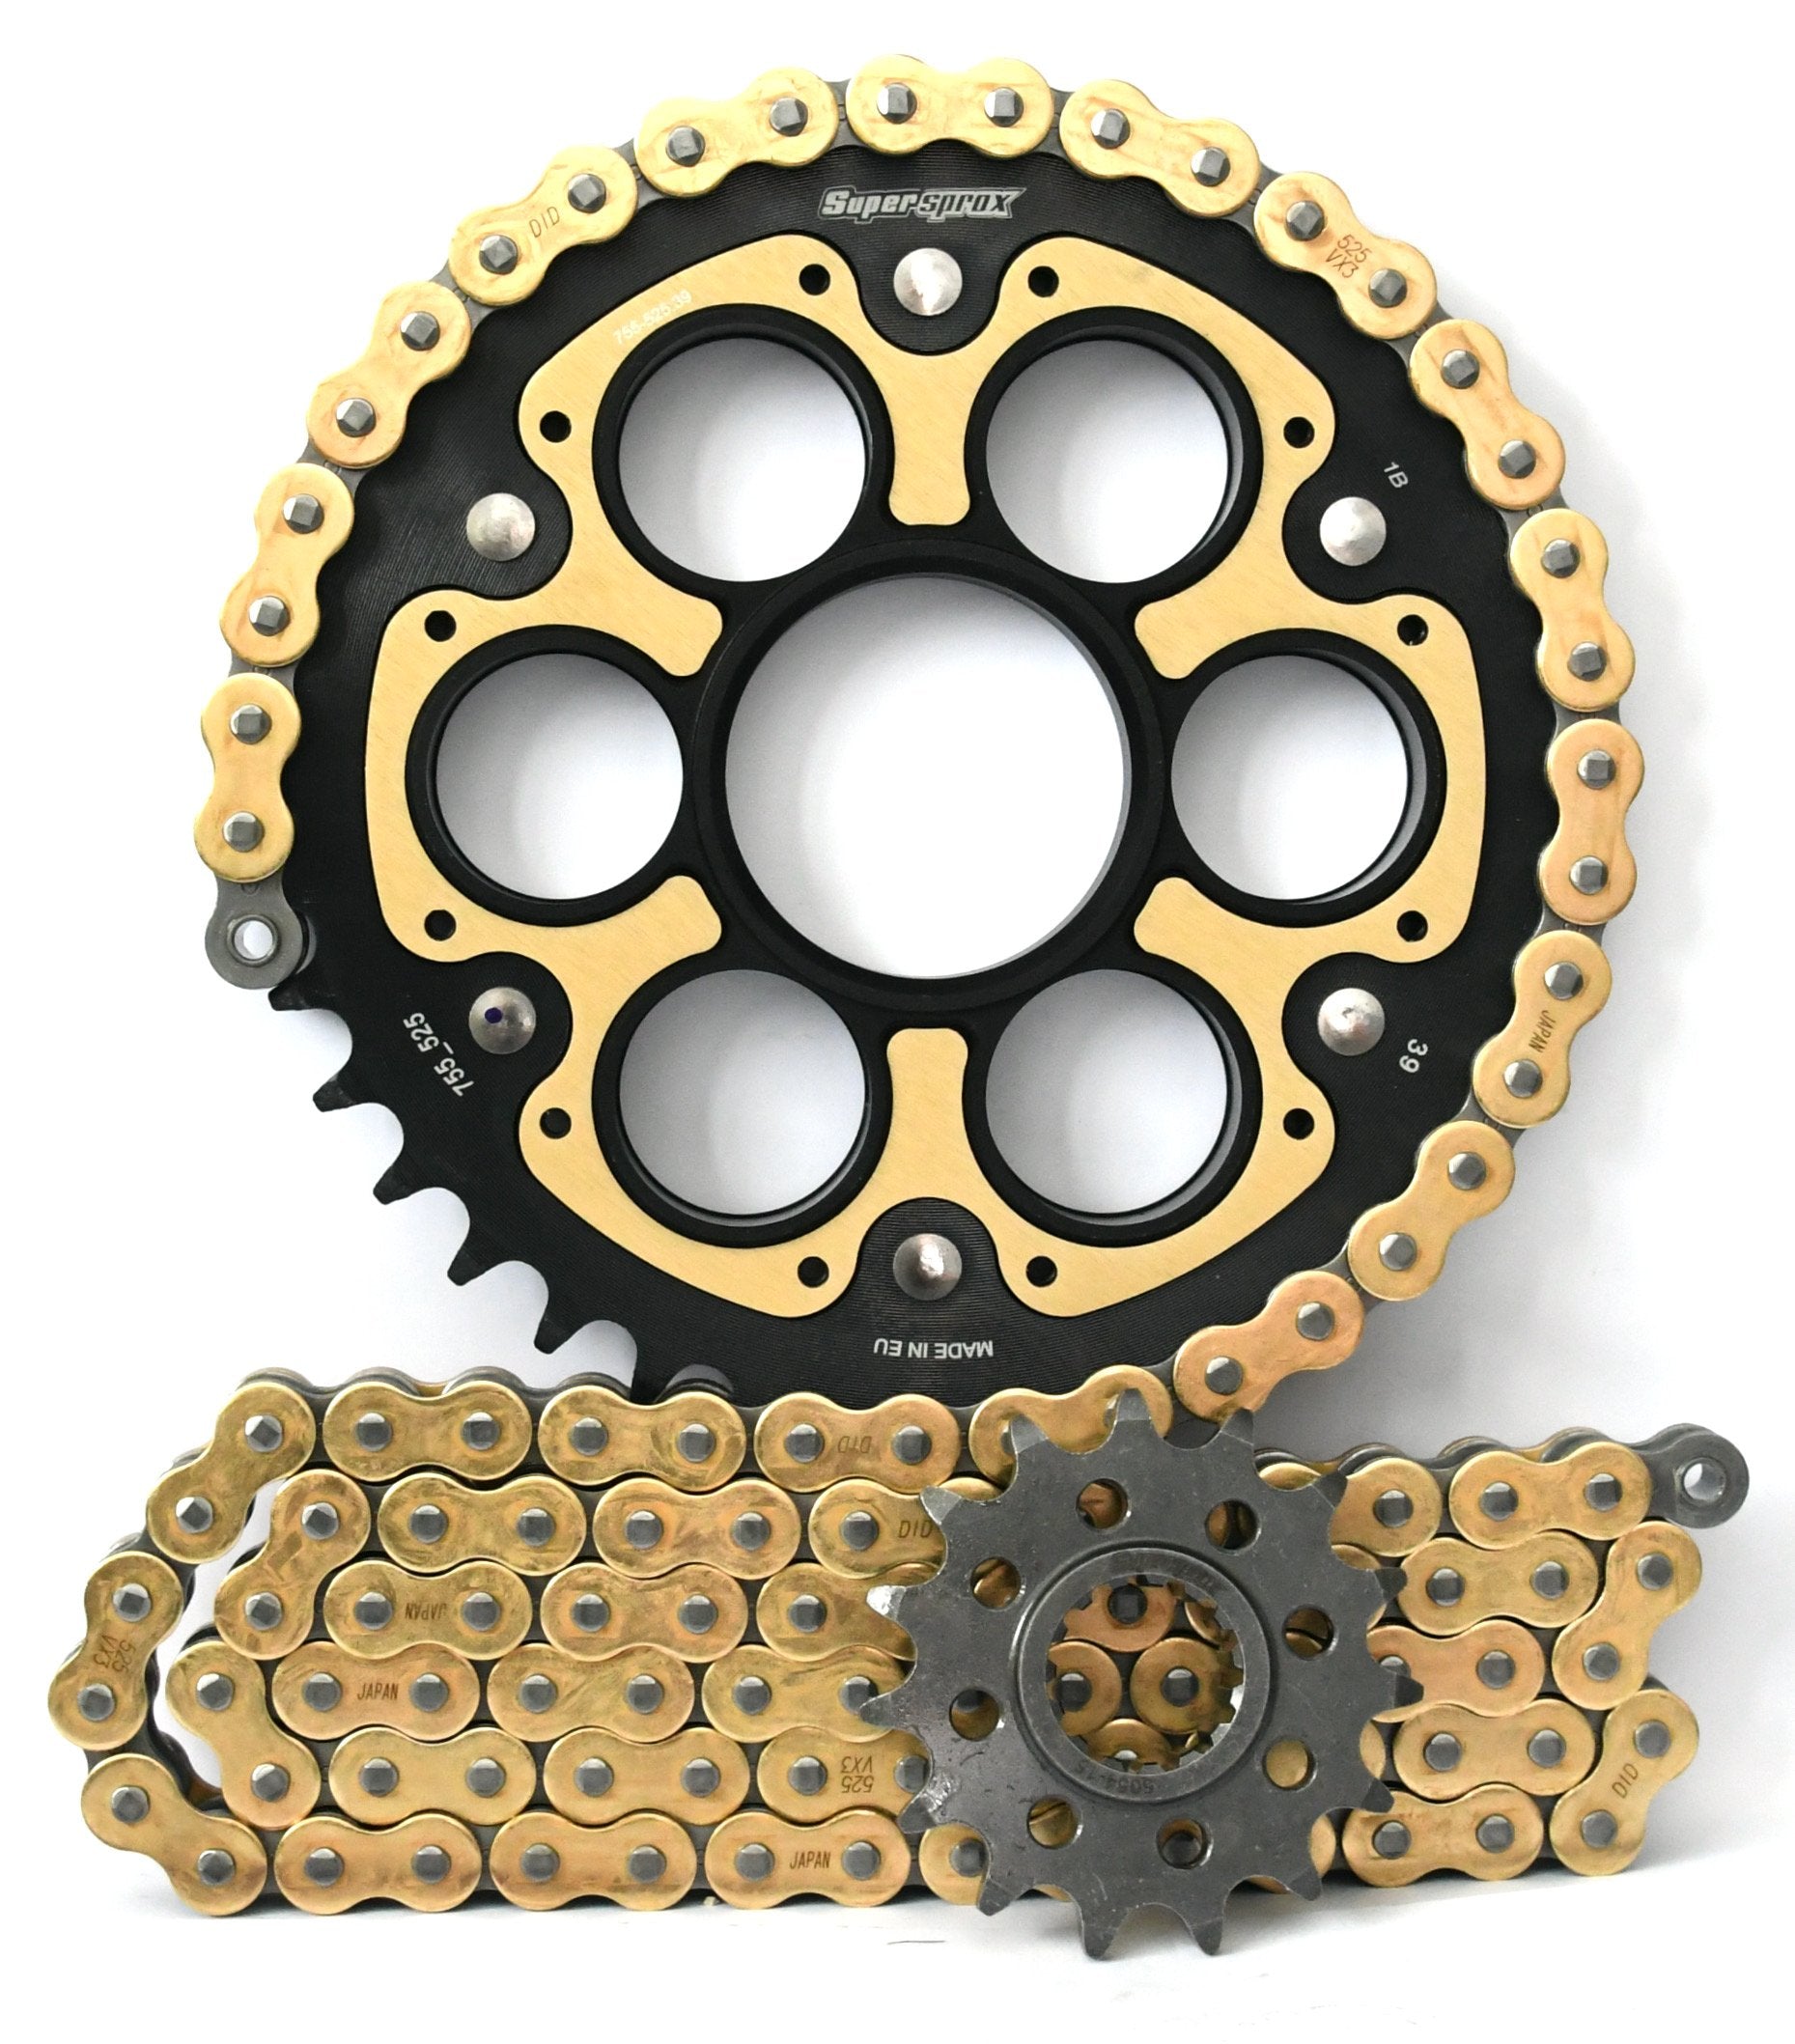 Supersprox Chain & Sprocket Kit for Ducati Panigale V2 2020> - Standard Gearing - 0